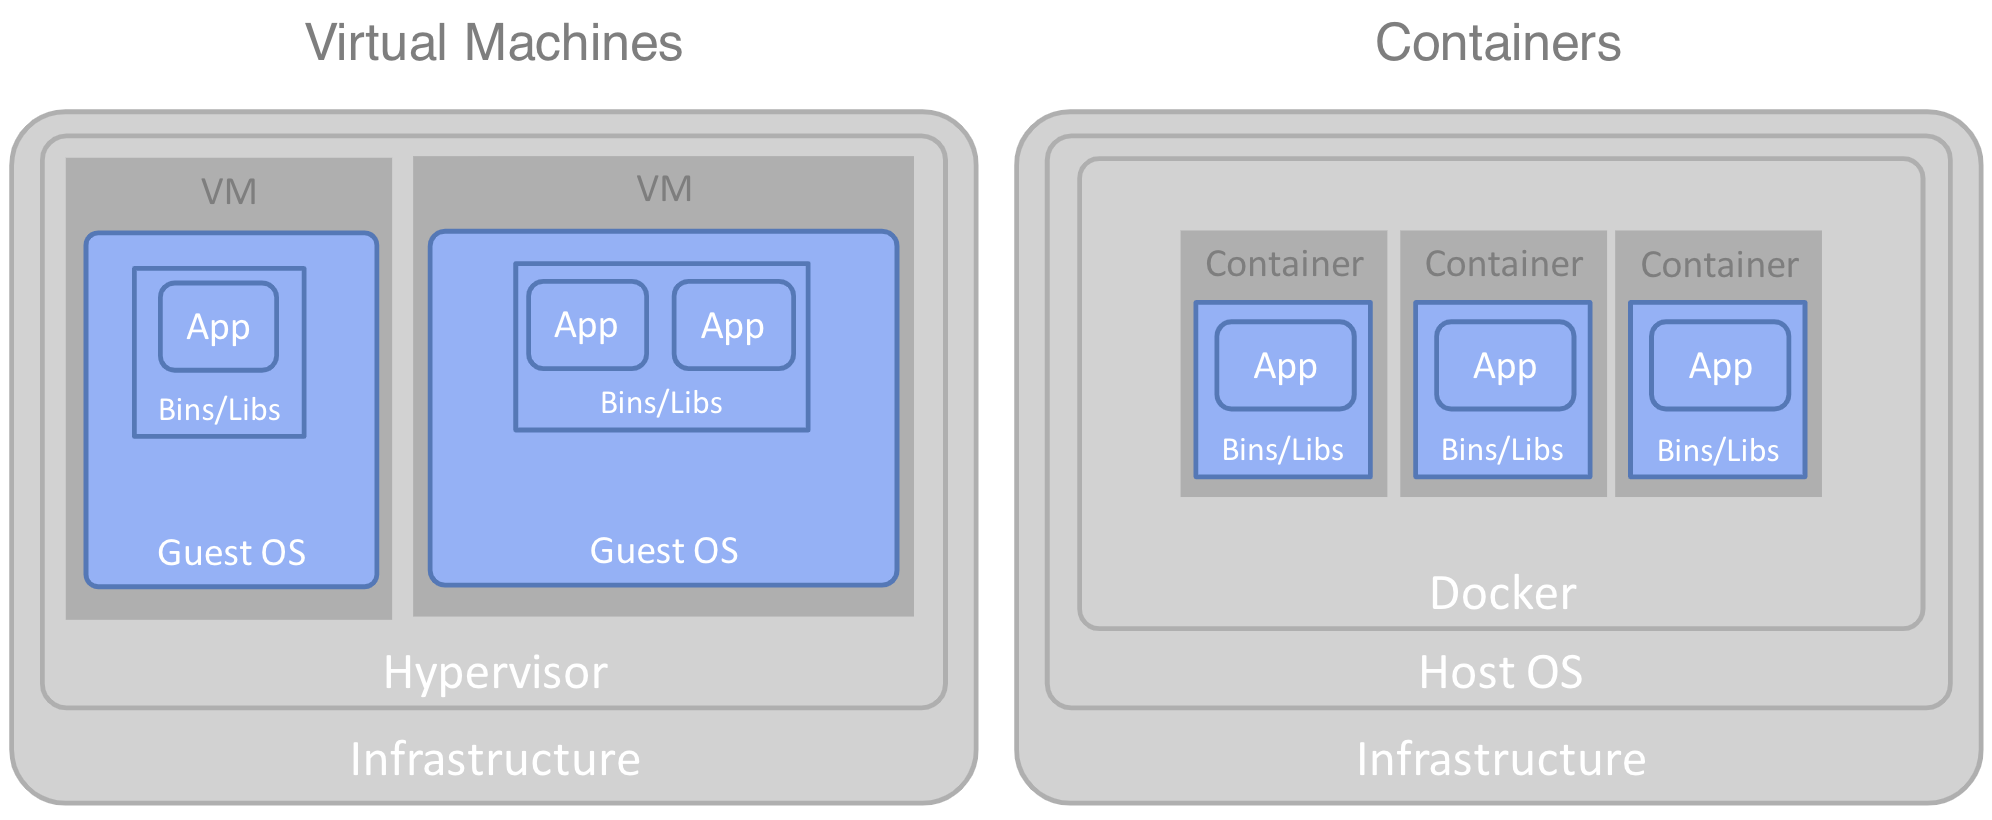 Difference between virtual machines and containers